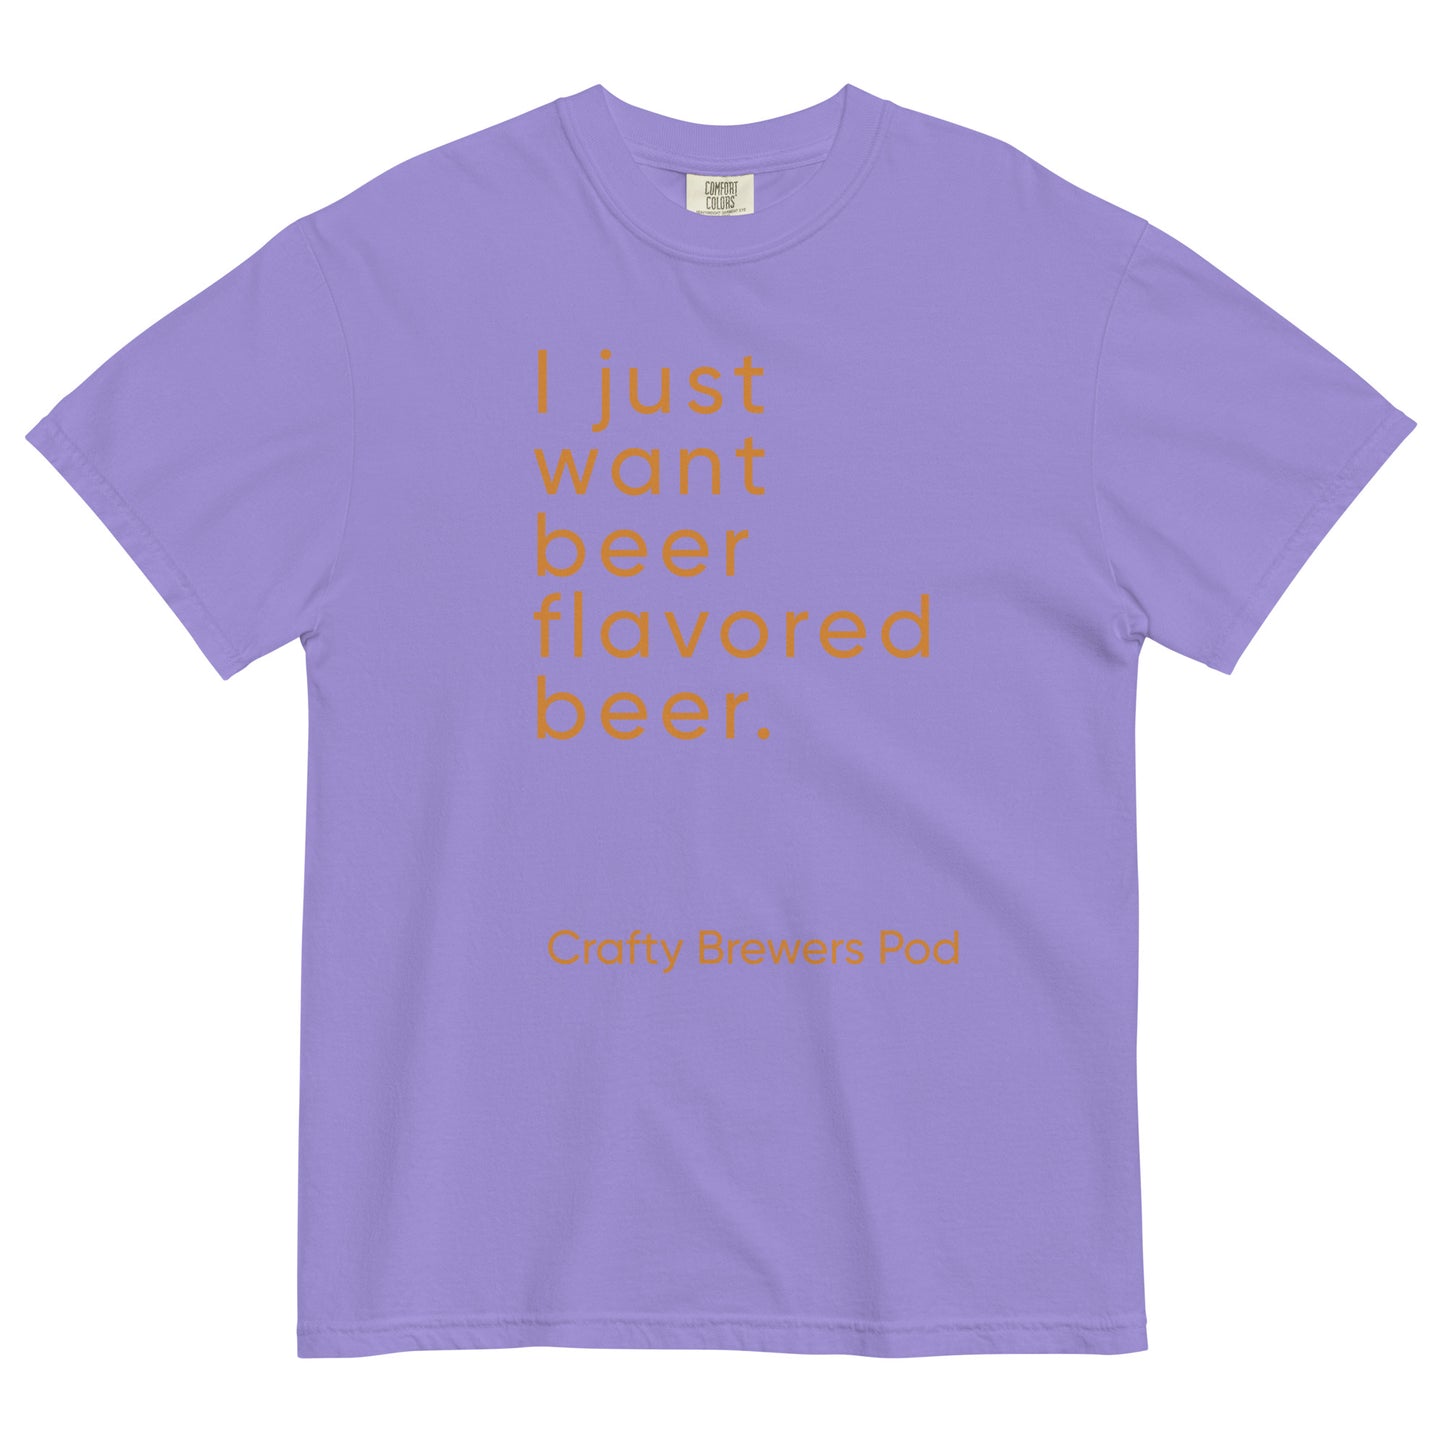 "Beer Flavored Beer" Garment-dyed Heavyweight T-shirt